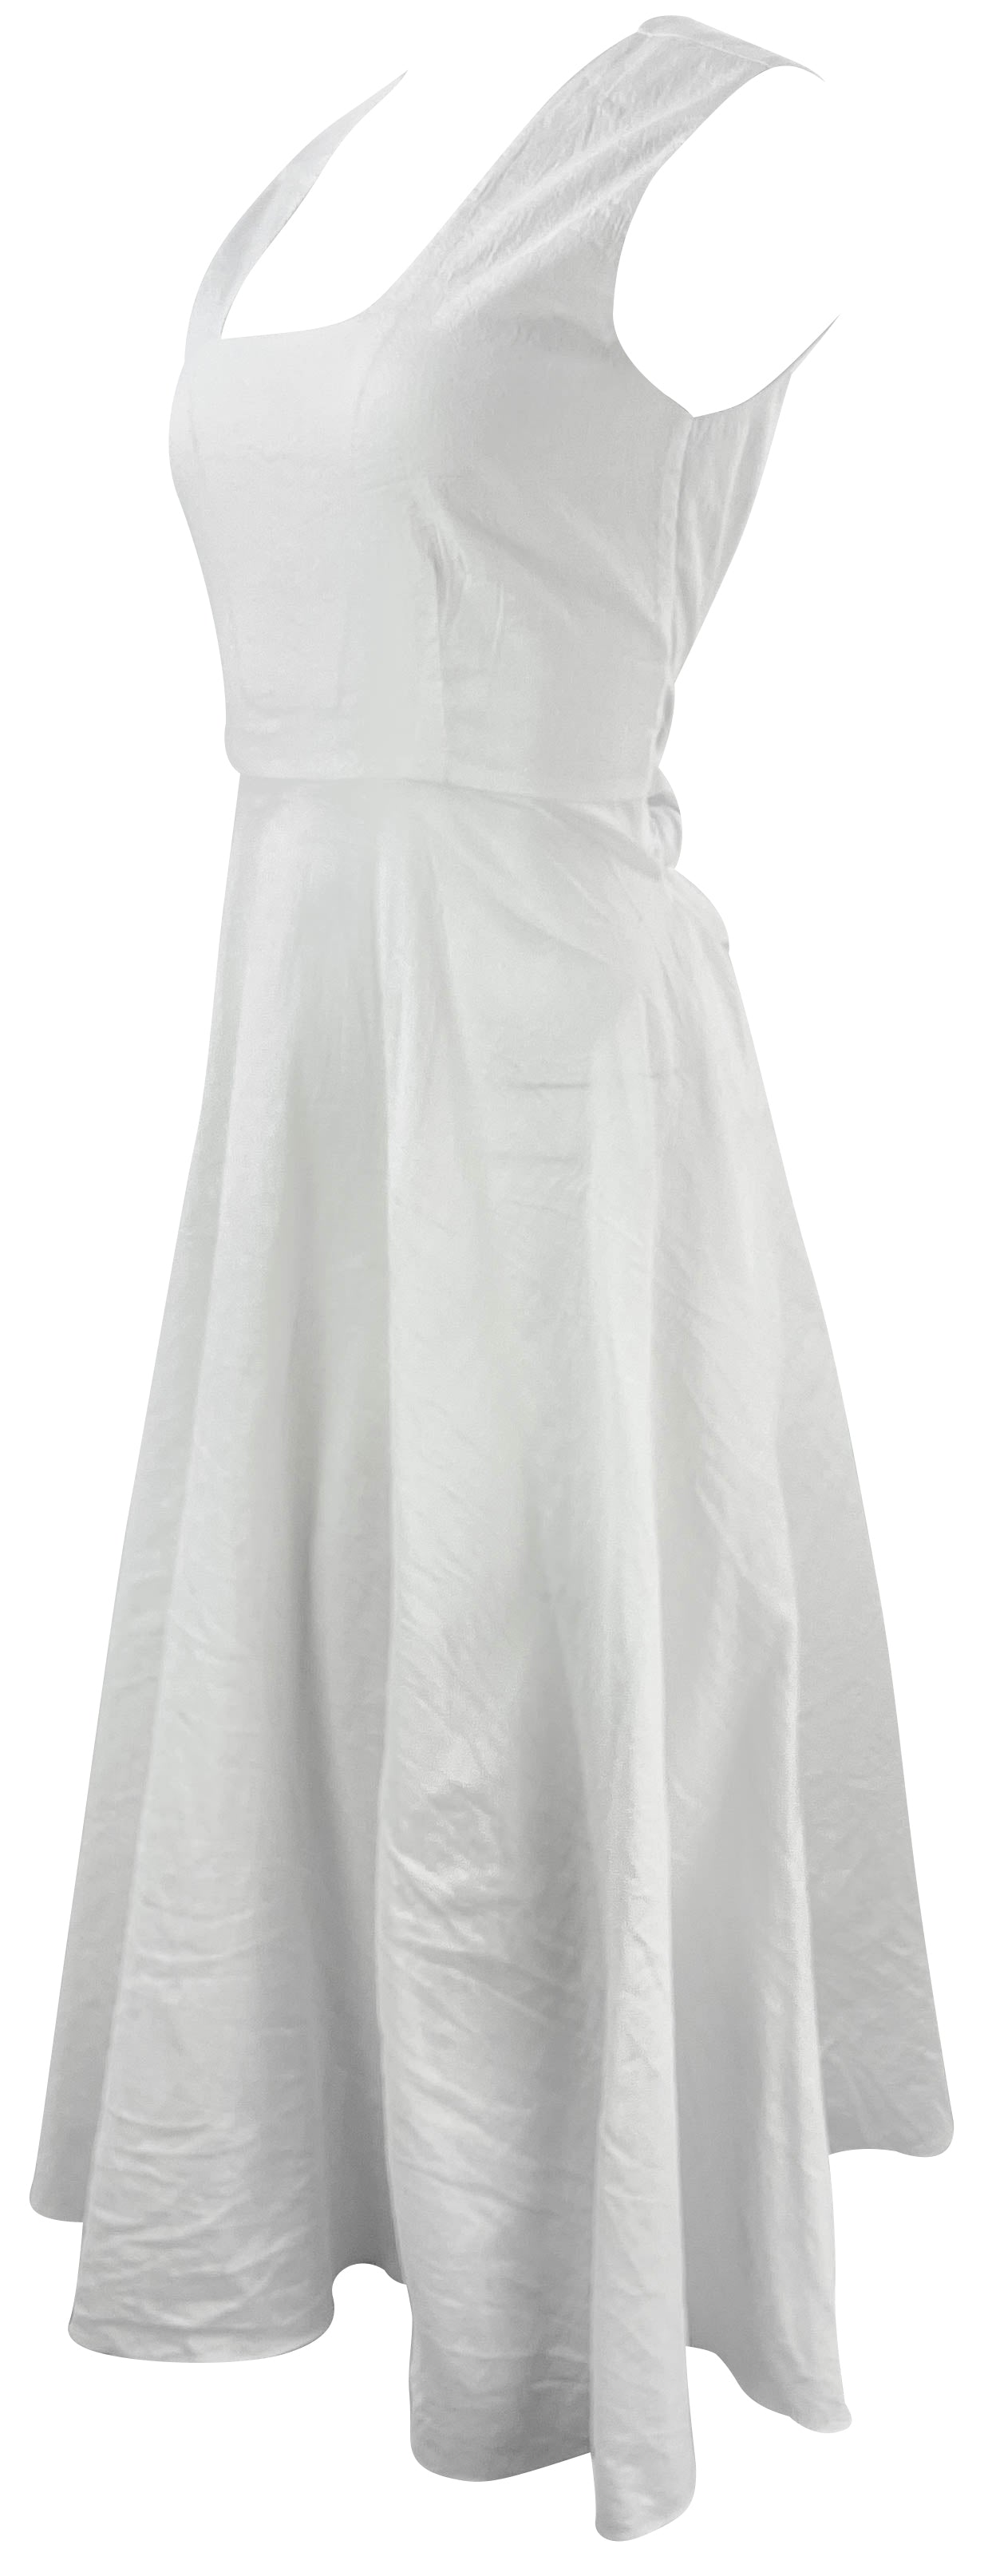 Partow Carina Linen Blend Crinkle Dress in Off-White - Discounts on Partow at UAL